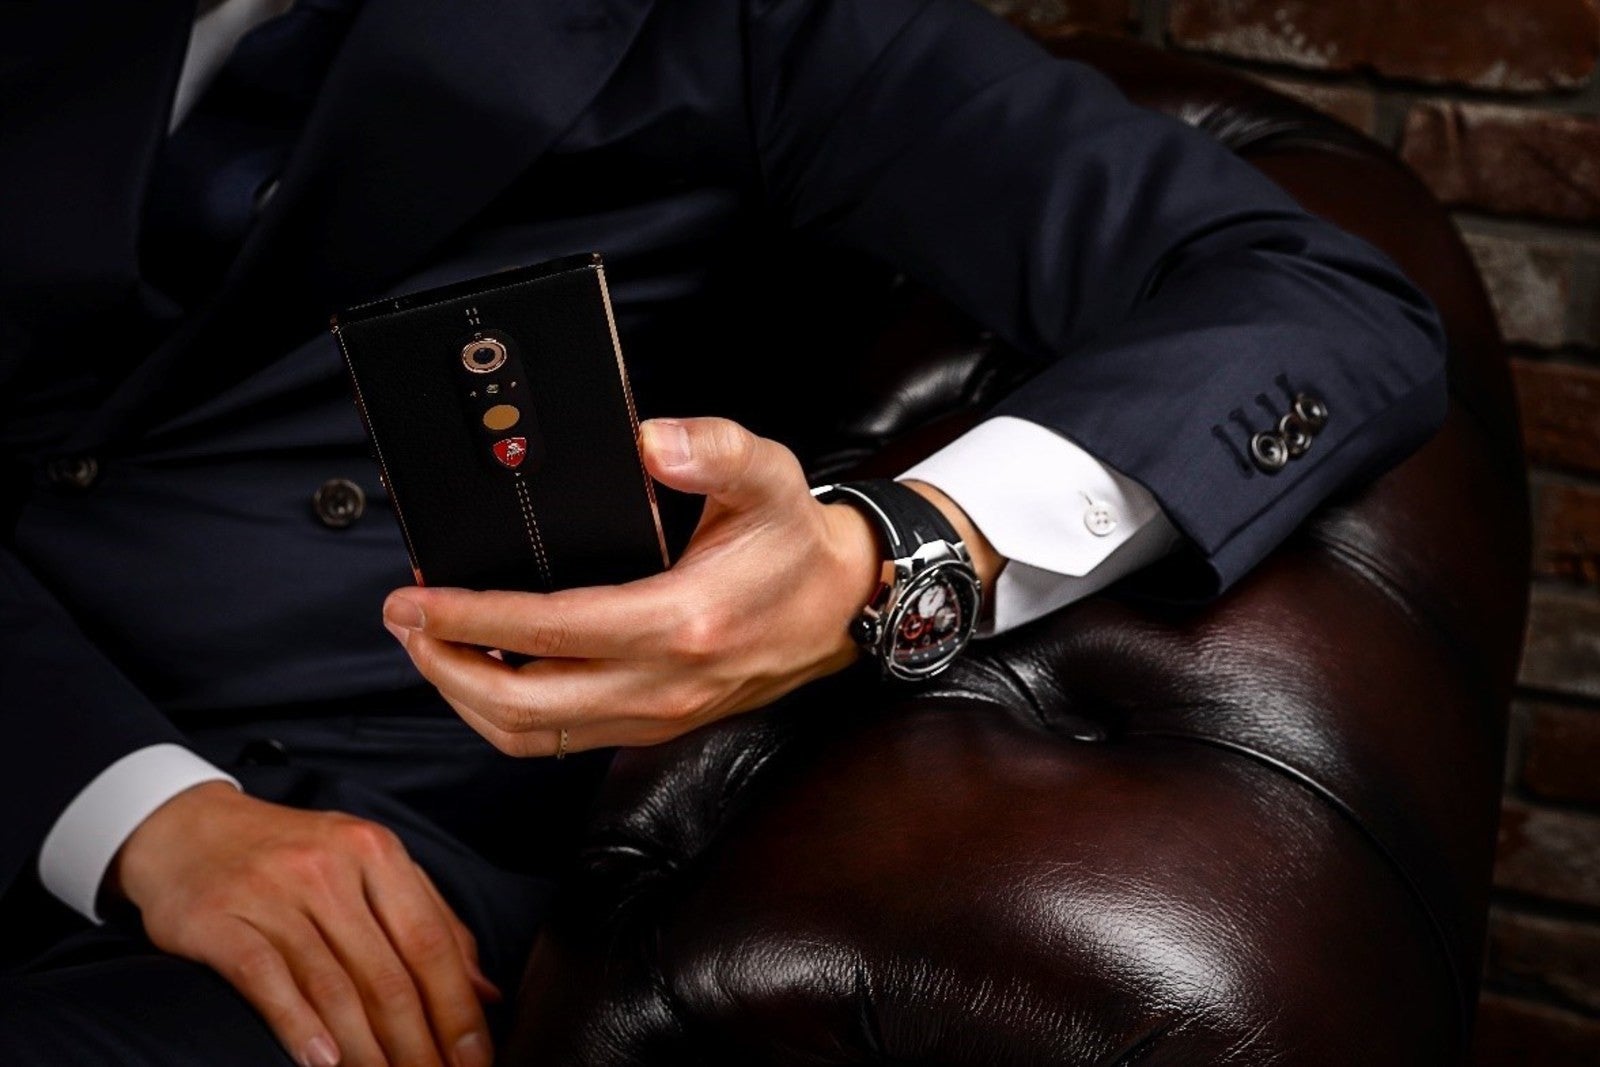 Lamborghini launches another luxury phone made from "the finest materials"